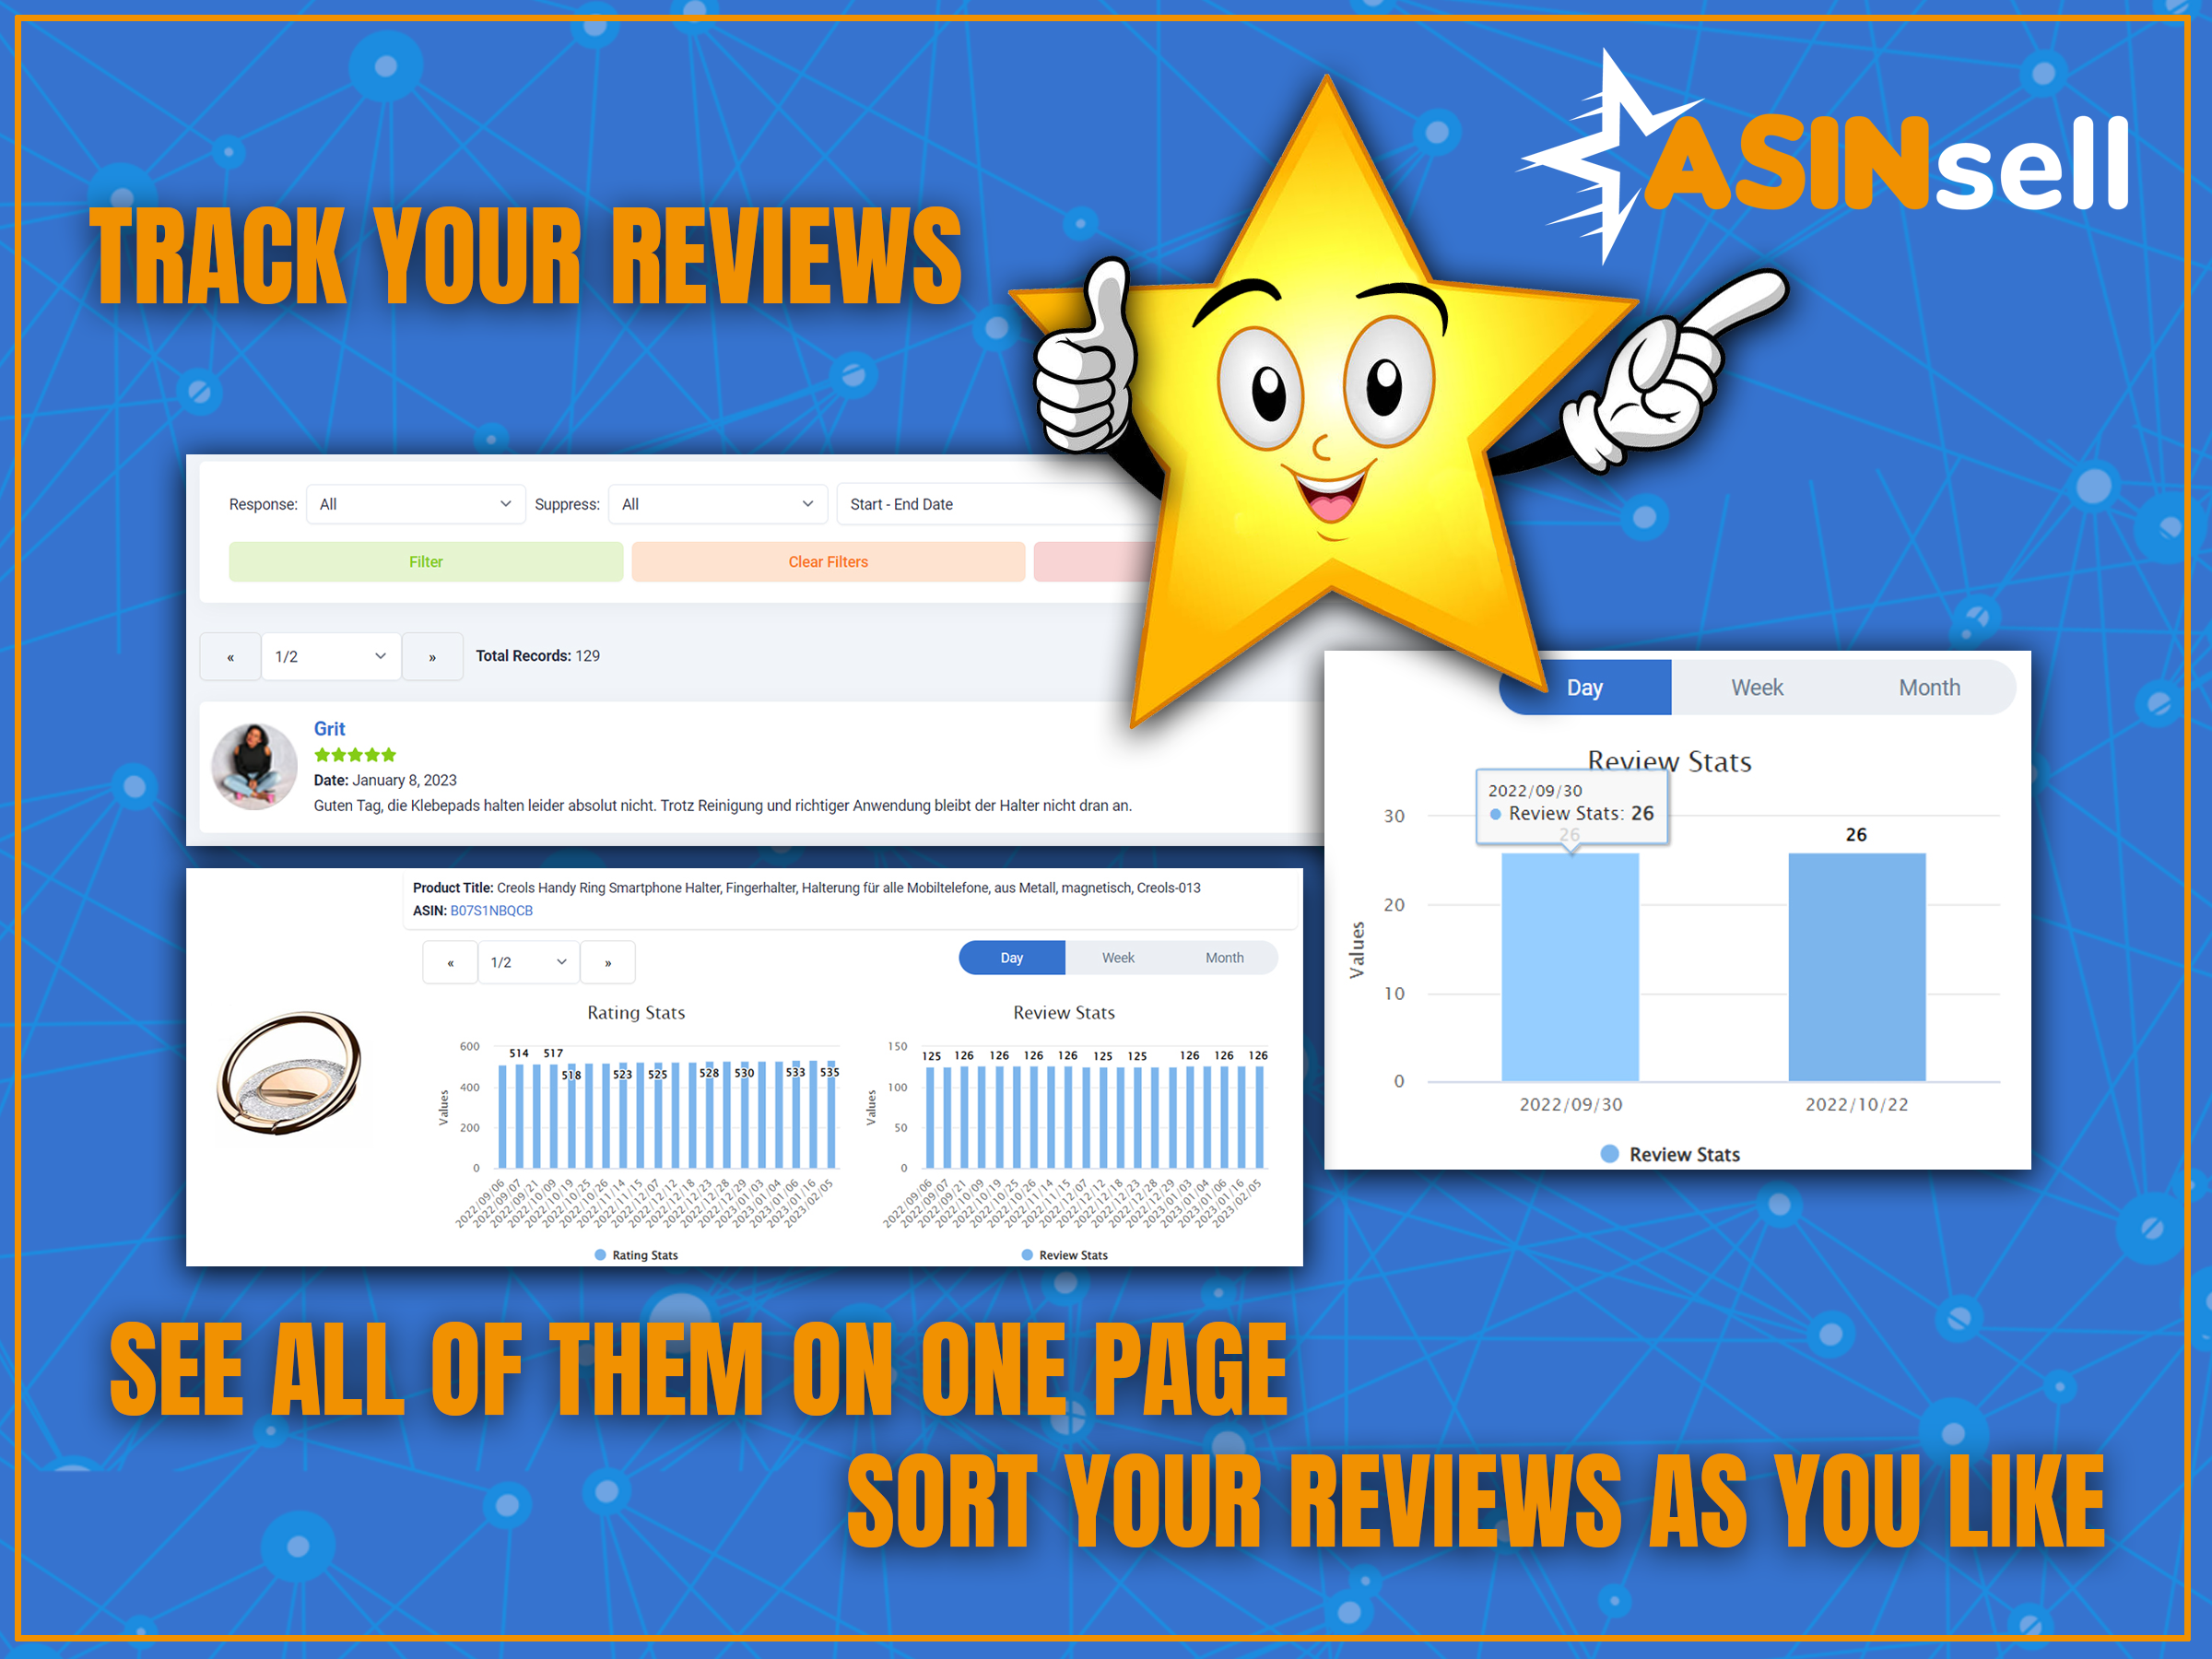 ASINsell Amazon Product Review Request Tool